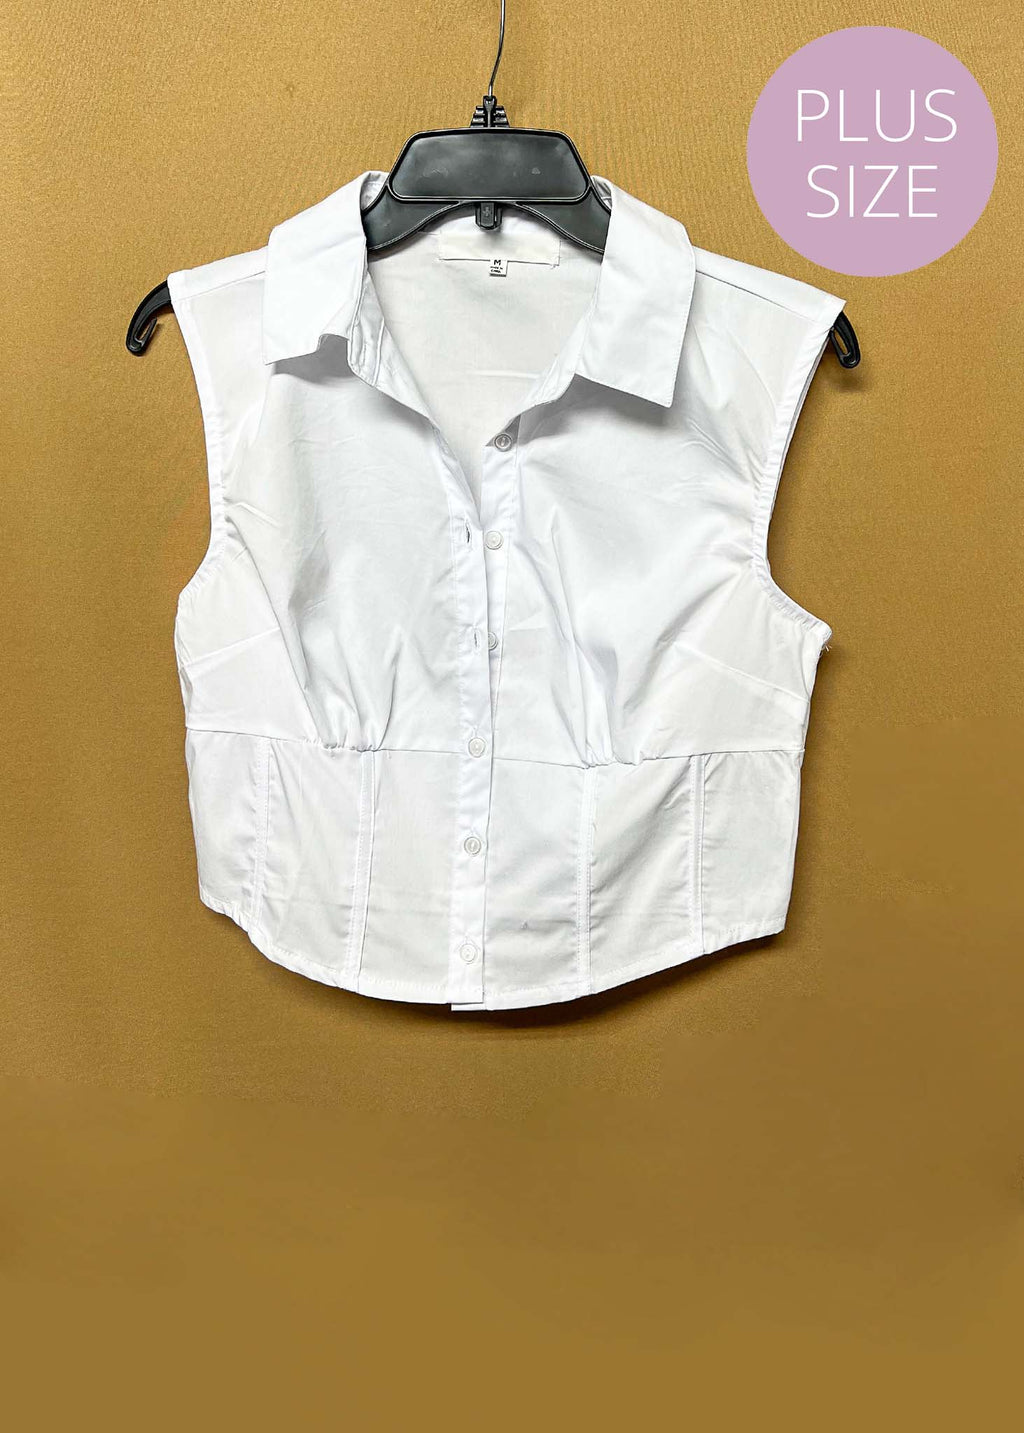 Women's Plus Sleeveless Collared Button Down Solid Crop Top